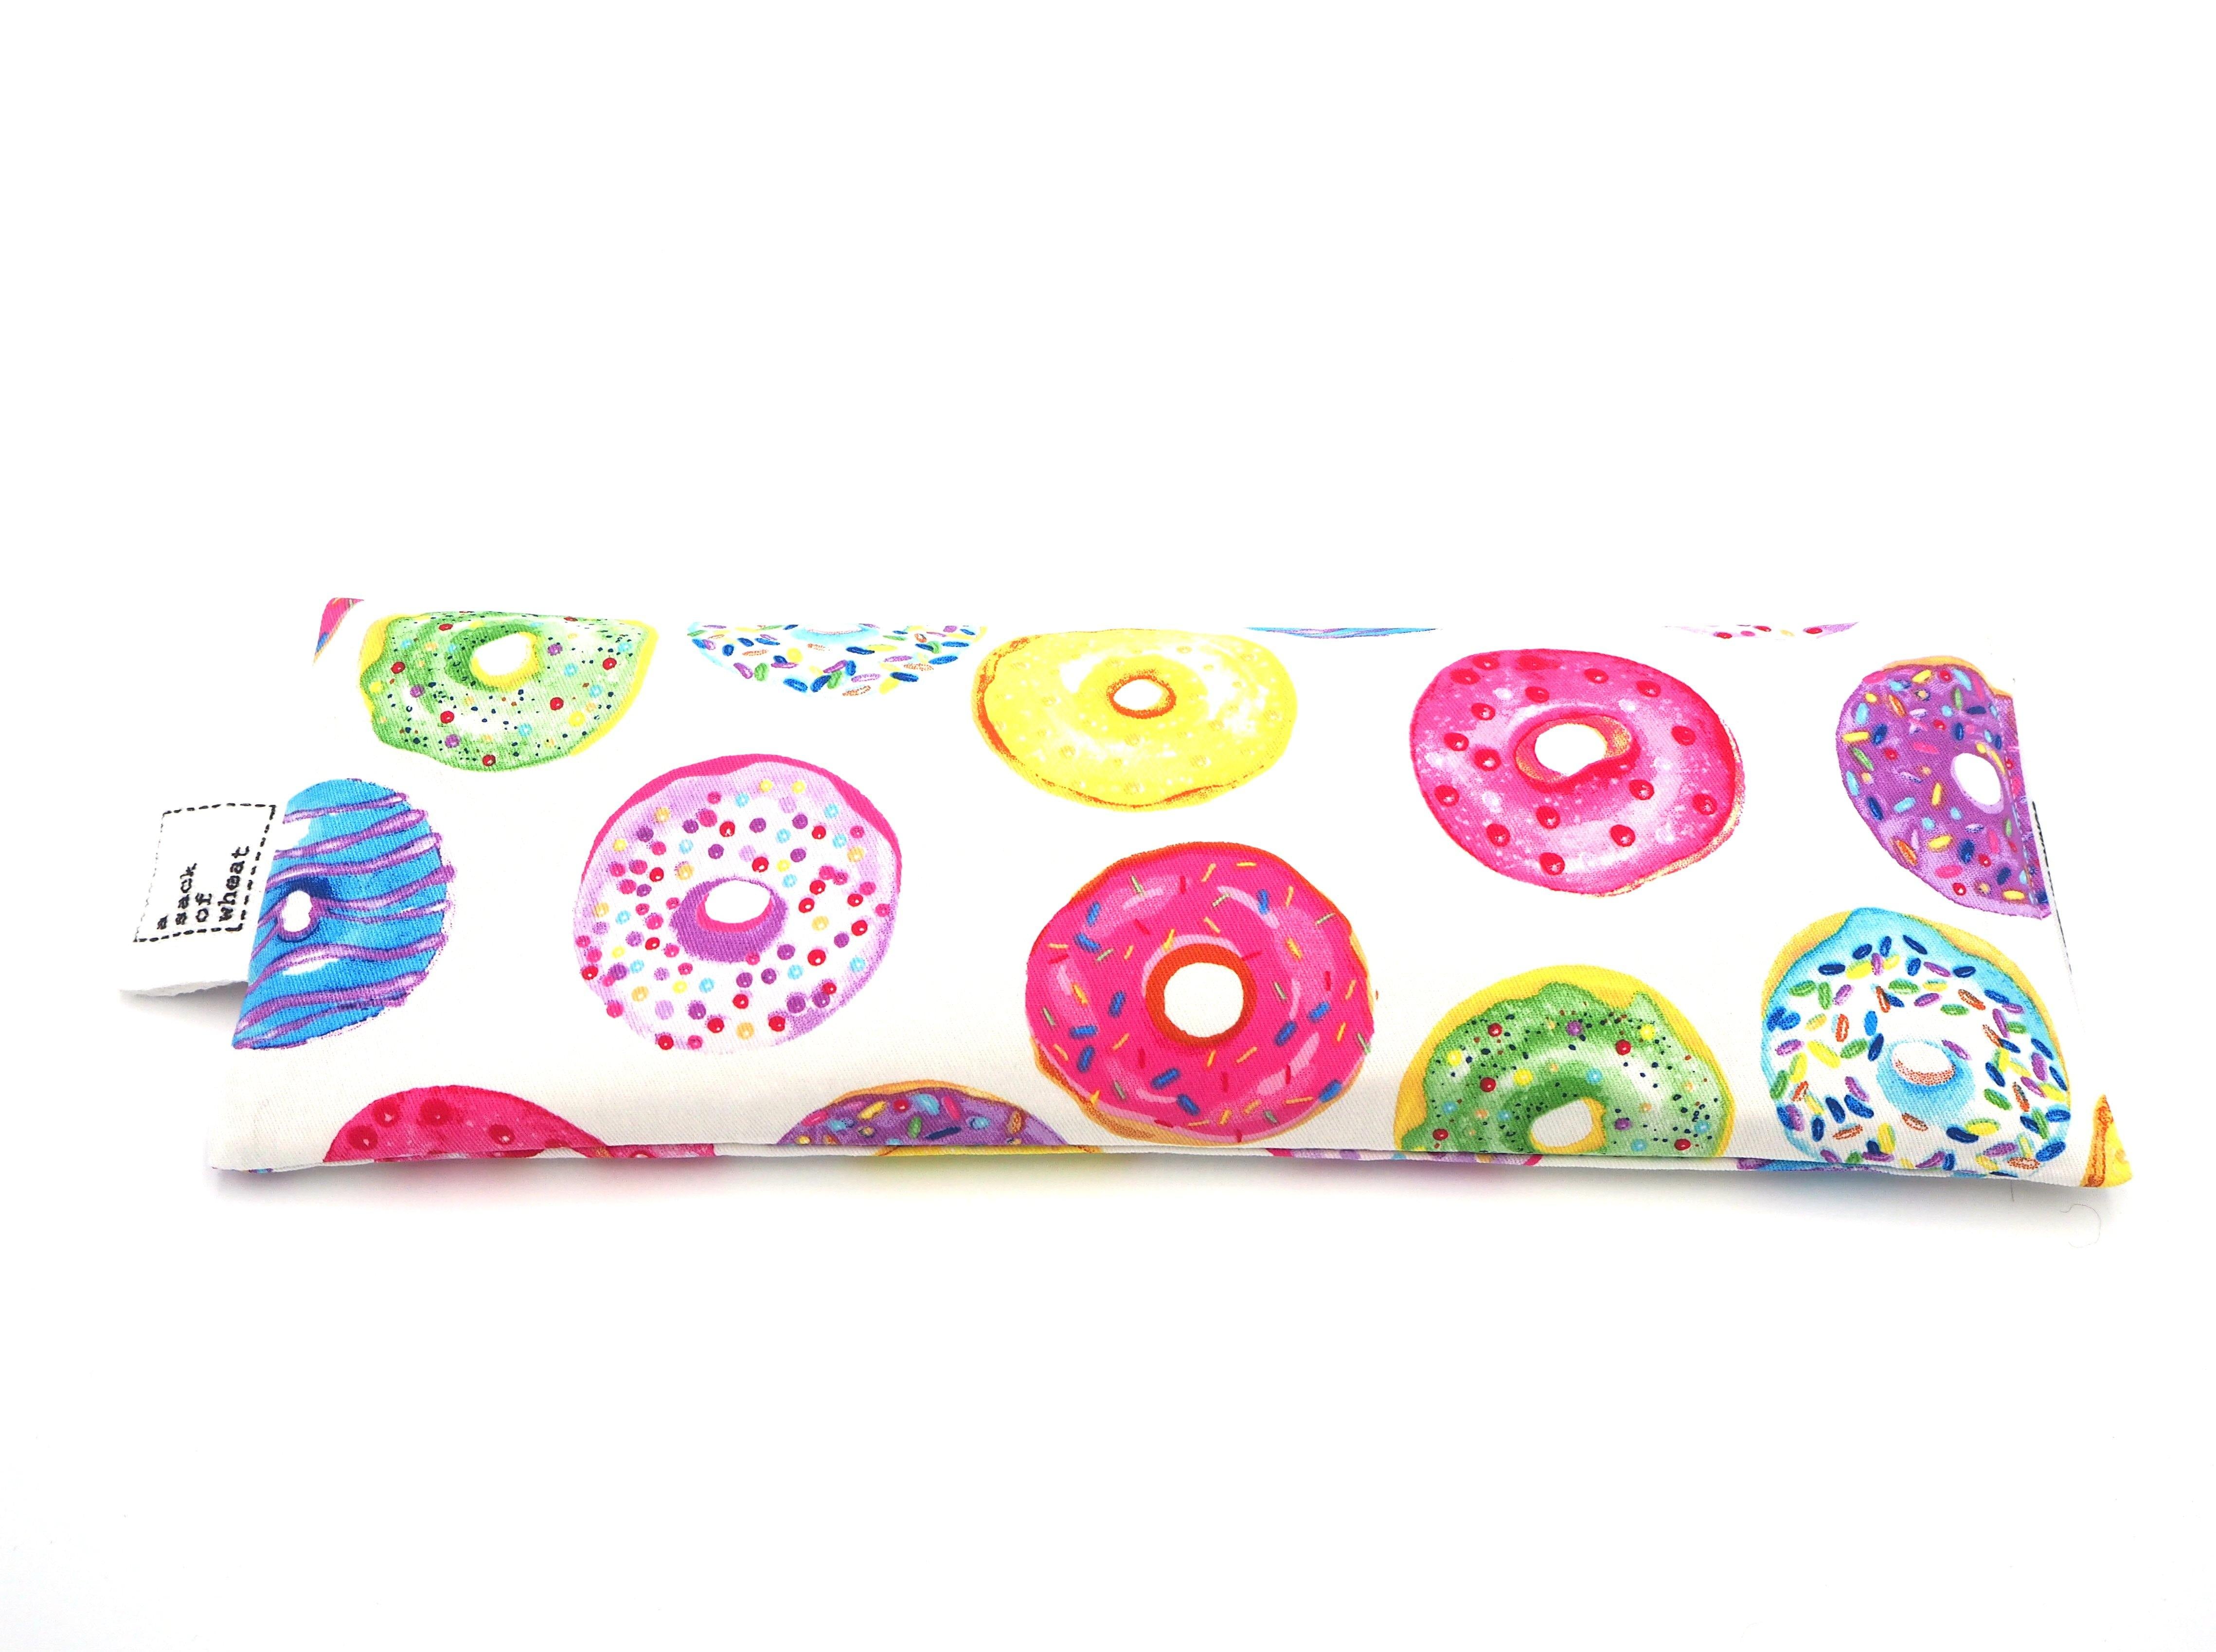 Flat view of A Sack Of Wheat, featuring delicious & colorful Donut images, 100% cotton fabric